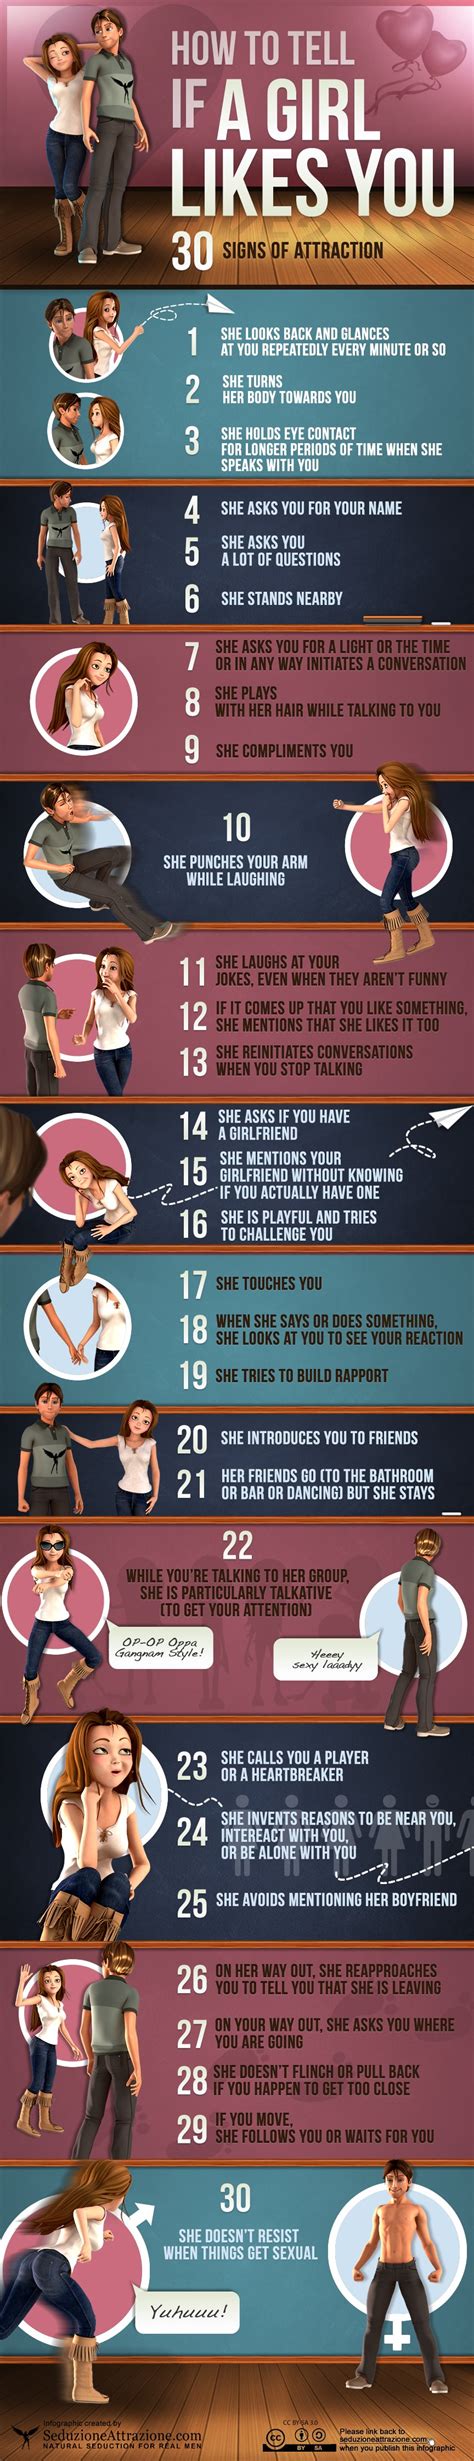 How to tell if she likes you?